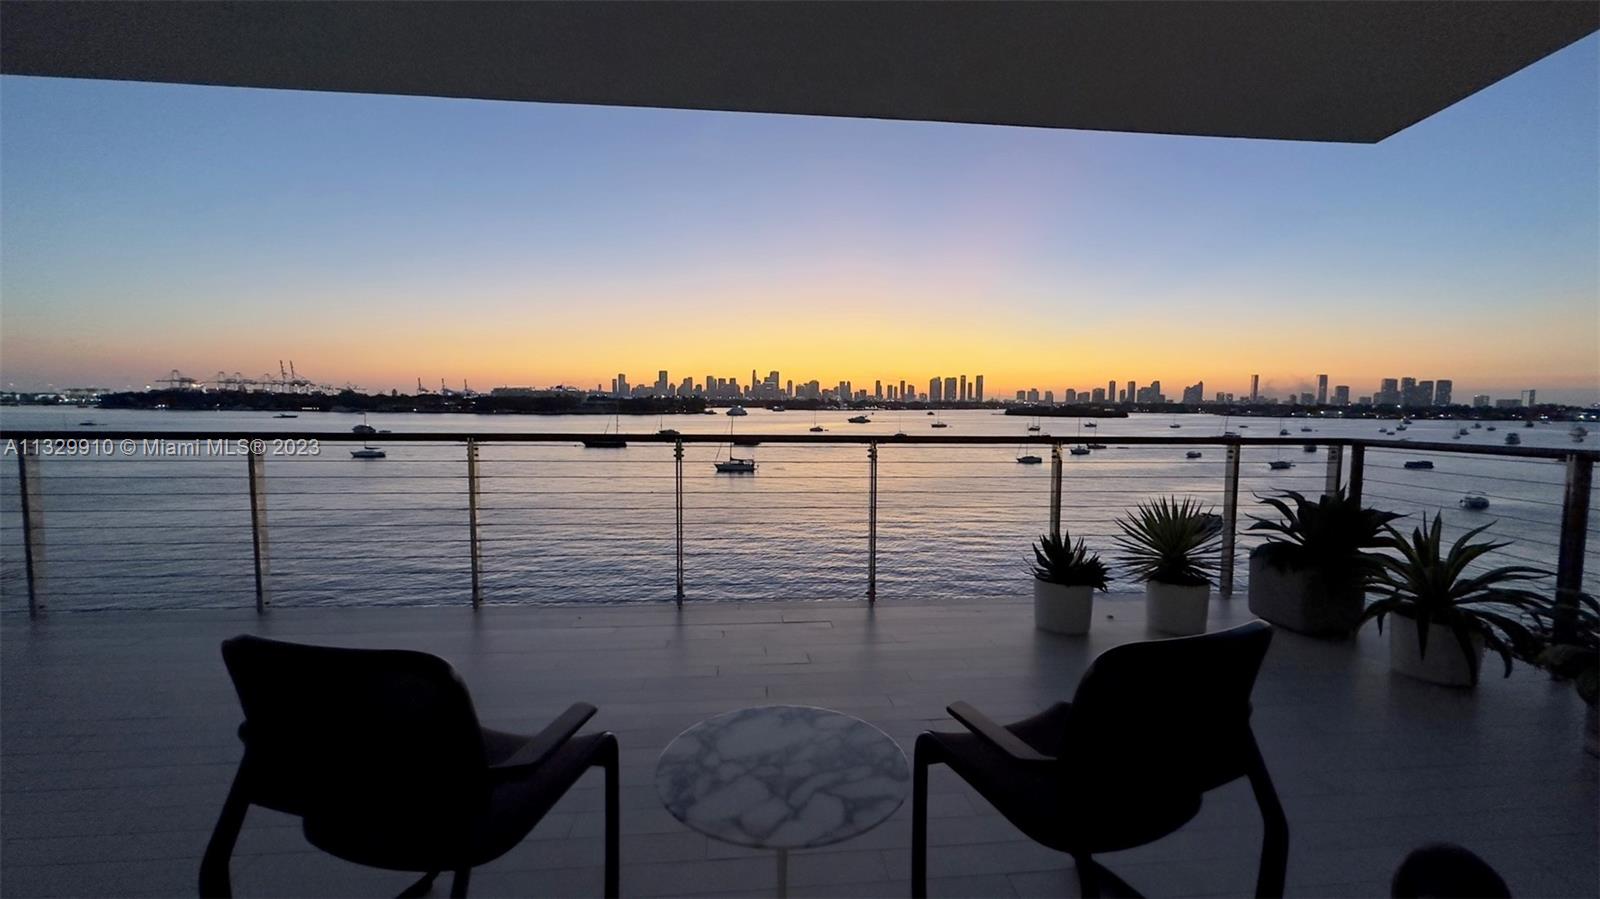 Sitting on top of the bay, gazing at the ever-changing light show produced by Miami Beach’s perfect weather, poised against the spectacular backdrop of the downtown Miami skyline, floating over Biscayne Bay & it’s parade of ships!  You can enjoy the endless entertainment this residence offers from its wrap around covered terrace surrounded by disappearing walls of glass, offering an indoor-outdoor lifestyle. This unit sparkles day & night accomplishing Pritzker Prize winning architect Jean Nouvel’s vision of “reflections” utilizing the city’s natural resources of light, water & surrounding island environments to fulfill a sensory filled ever changing experience from day to night. 2 parking spaces & electric car charging station. This architectural masterpiece is simply magnificent!